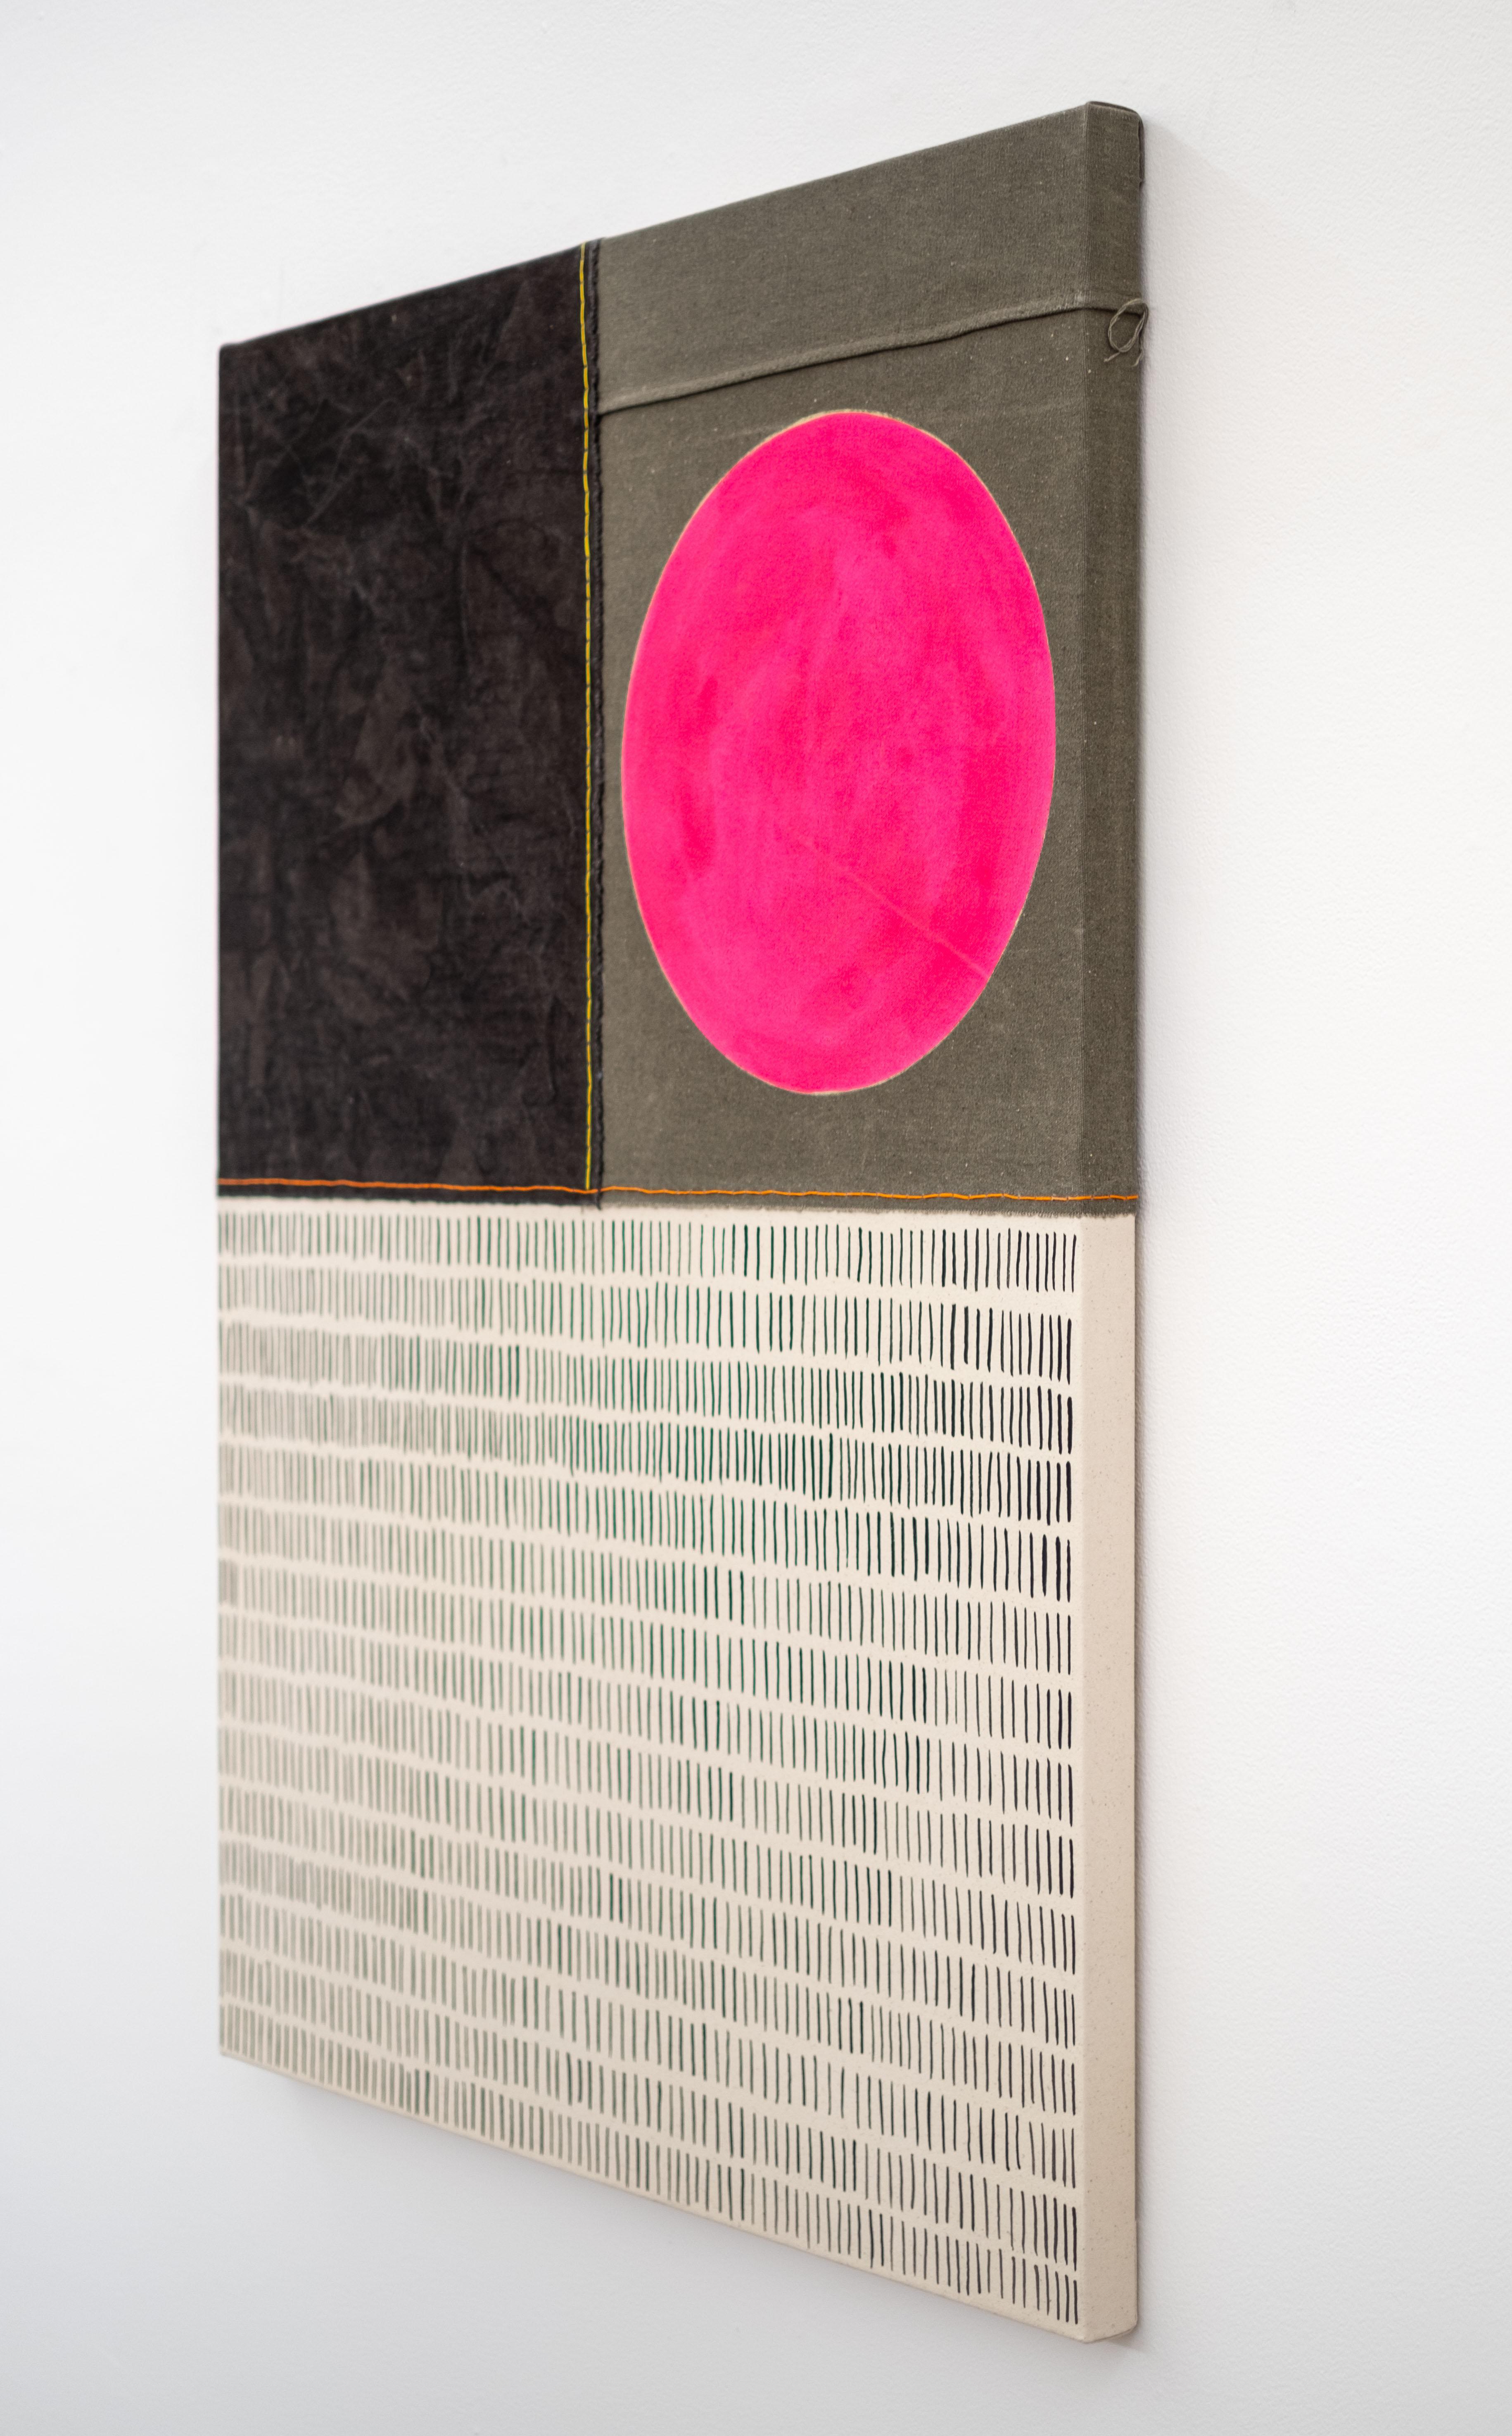 A joyful bright pink sun sits in one corner of this bold new work by Aron Hill. The image of the sun, symbolic of a guiding light has always been central to the work of this Calgary-based artist. Hill’s recent minimalist artwork explores a more